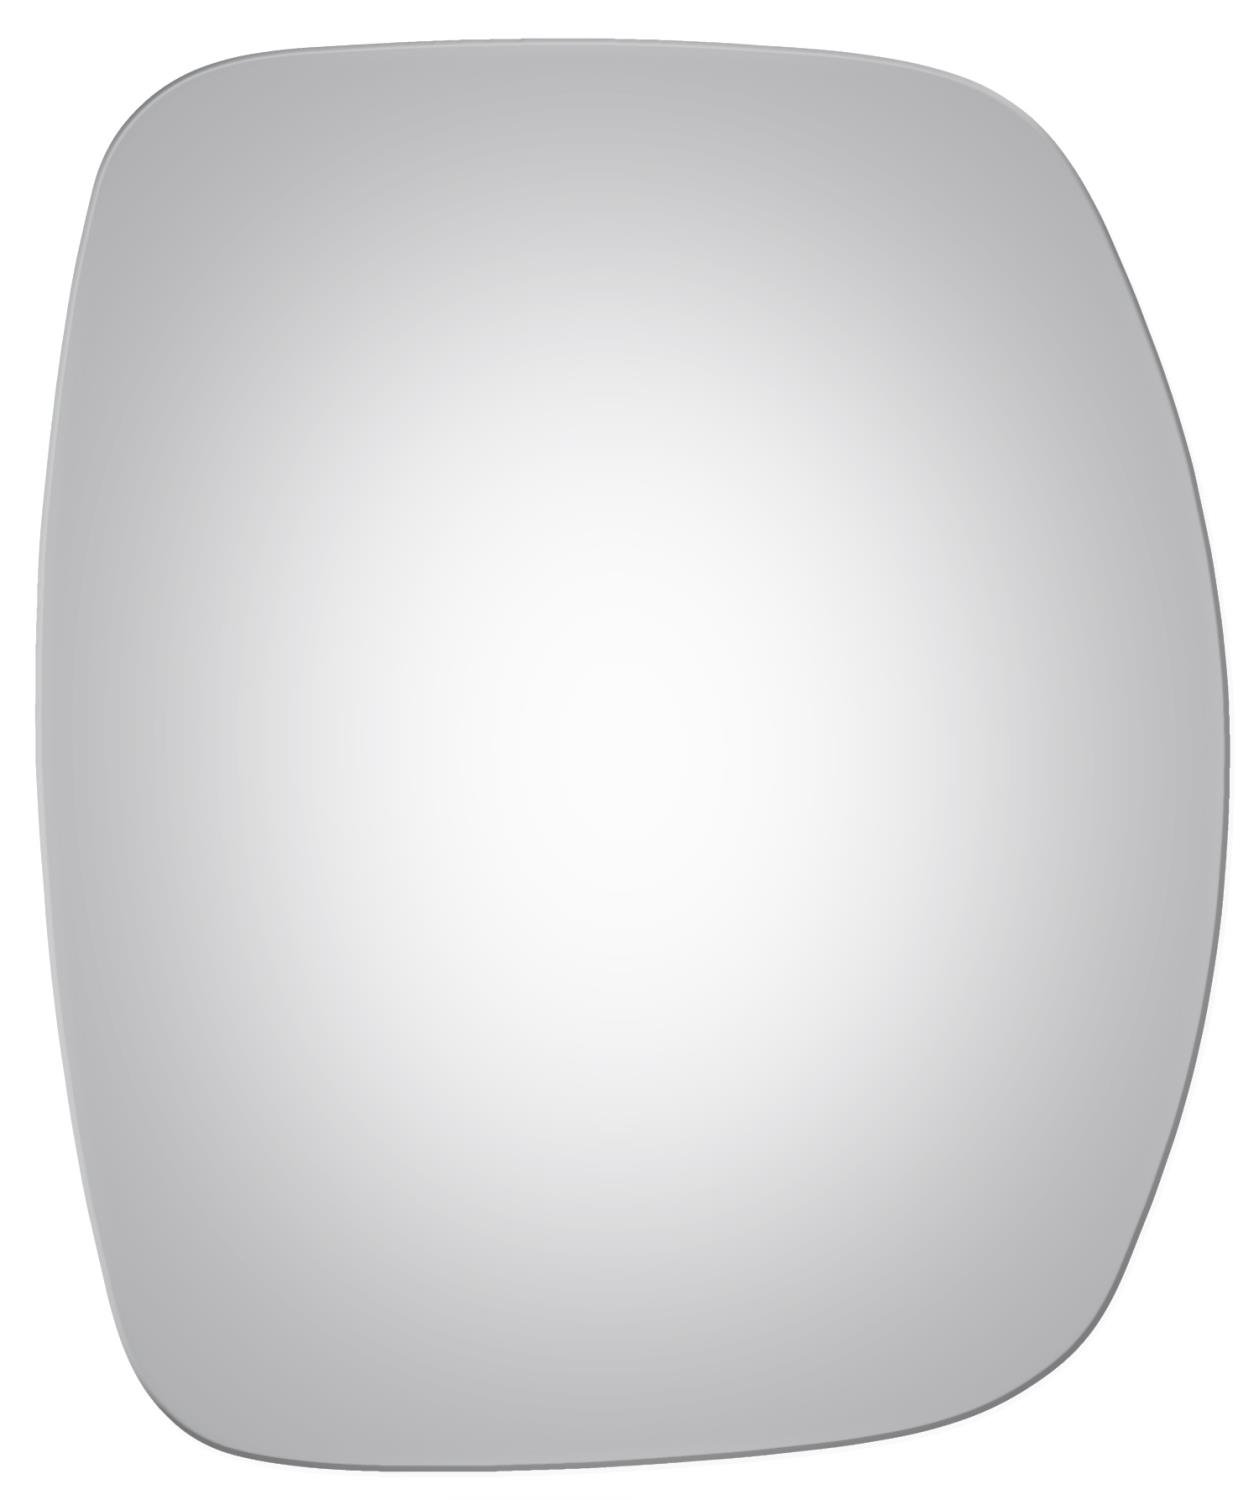 3265 SIDE VIEW MIRROR